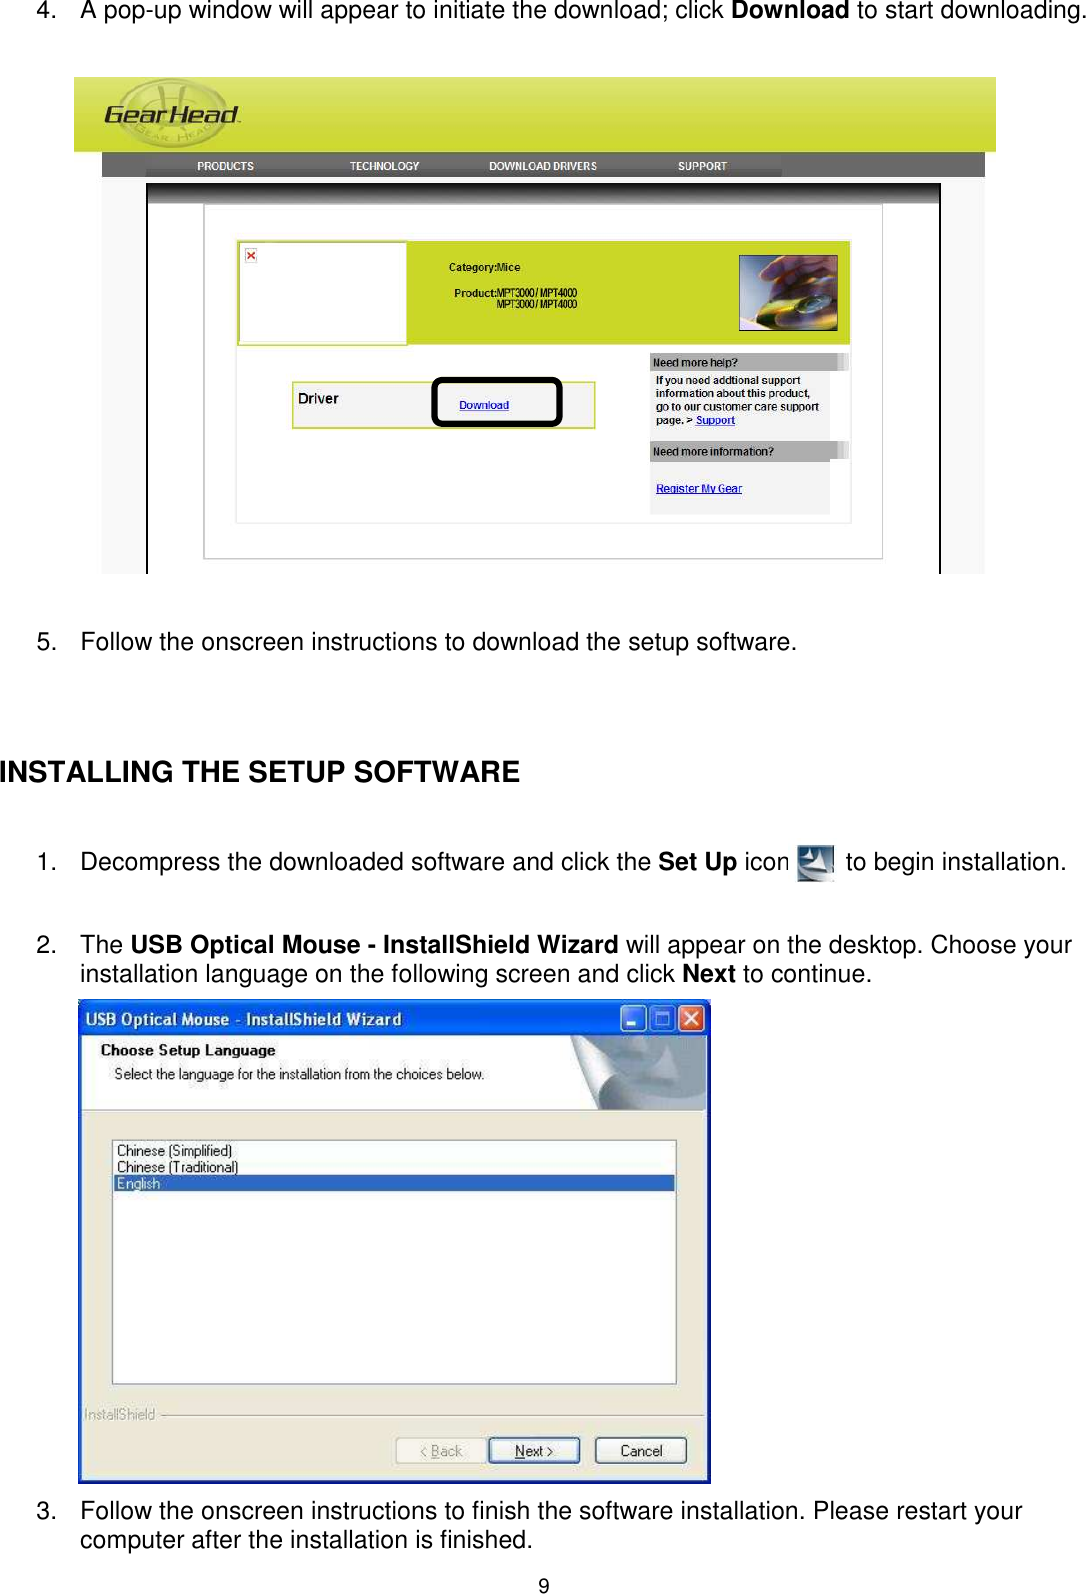 9 4.  A pop-up window will appear to initiate the download; click Download to start downloading.    5.  Follow the onscreen instructions to download the setup software.   INSTALLING THE SETUP SOFTWARE  1.  Decompress the downloaded software and click the Set Up icon        to begin installation.                    2.  The USB Optical Mouse - InstallShield Wizard will appear on the desktop. Choose your installation language on the following screen and click Next to continue.          3.  Follow the onscreen instructions to finish the software installation. Please restart your computer after the installation is finished.  